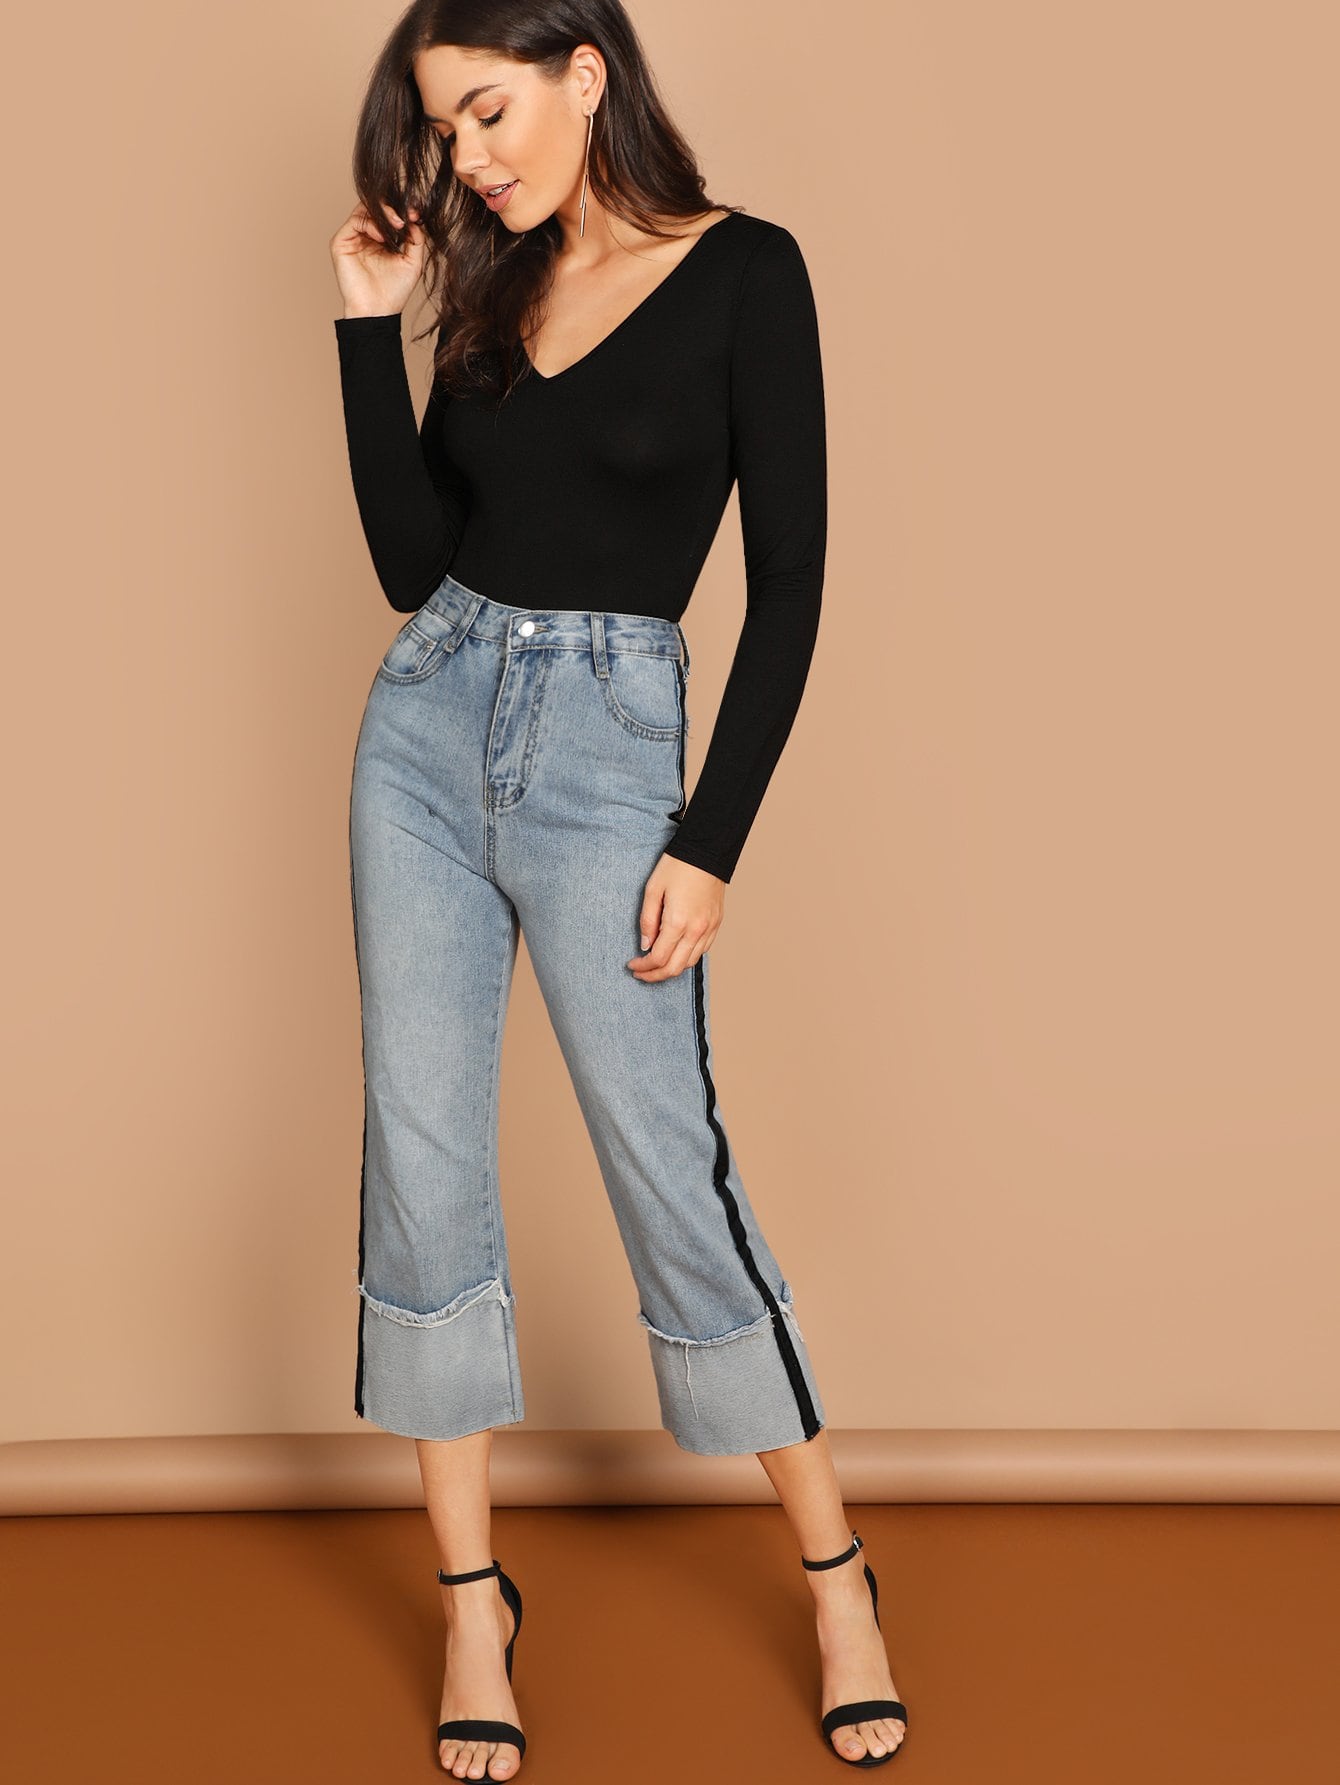 V-neck Form Fitted Crop Tee